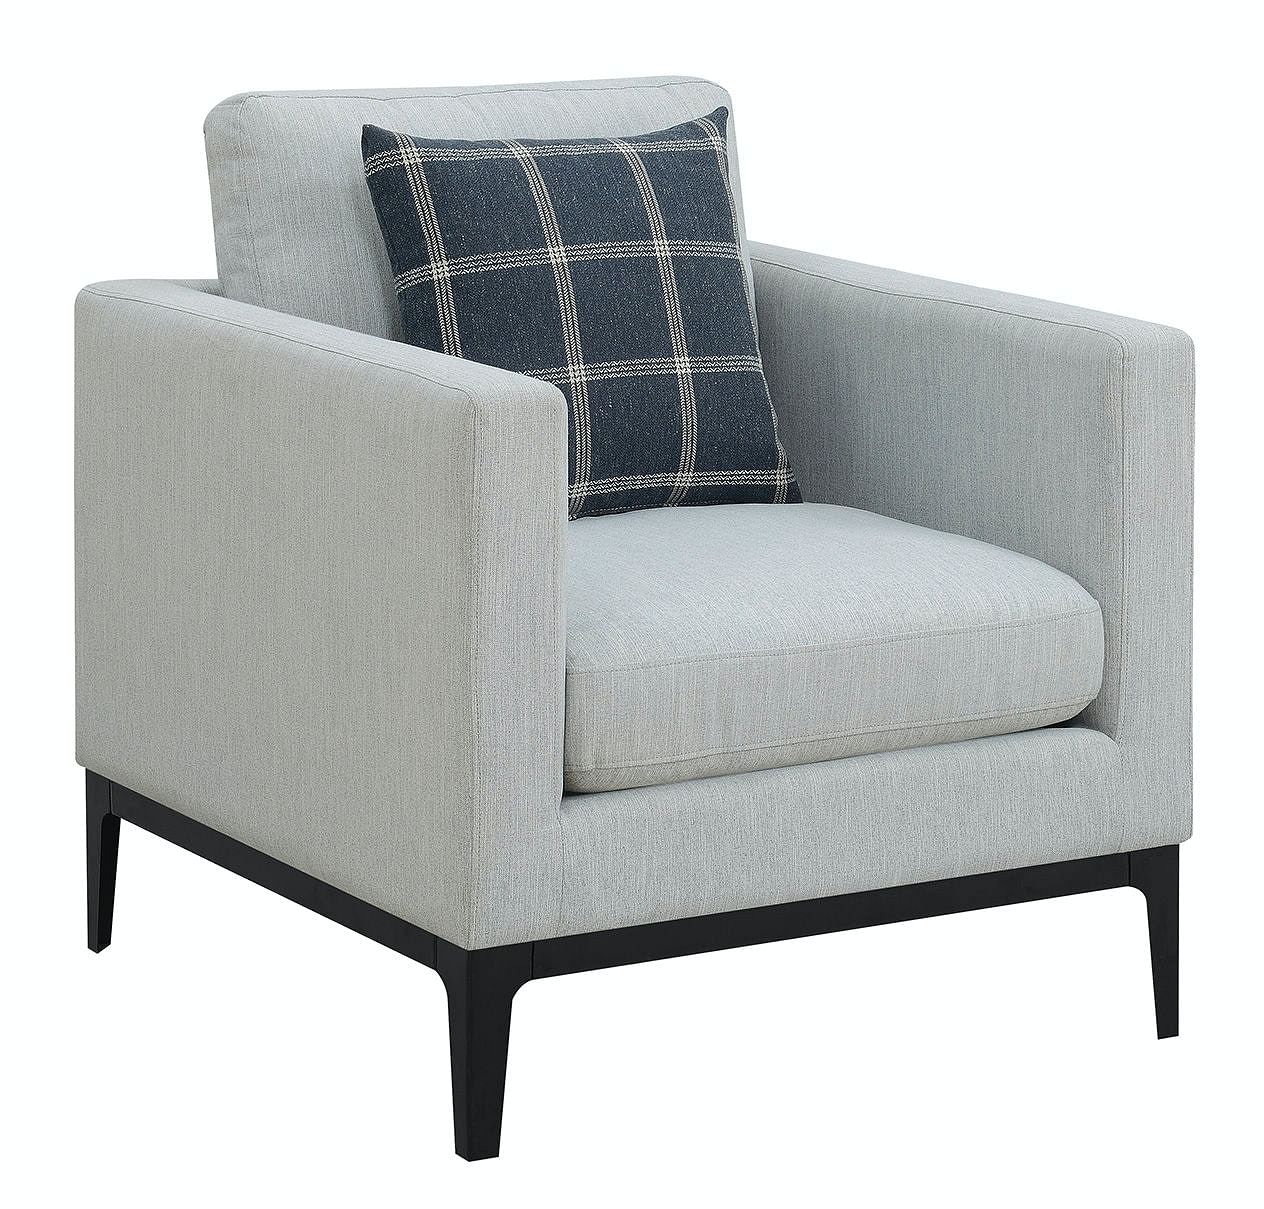 Coaster Living Room Chair 508683